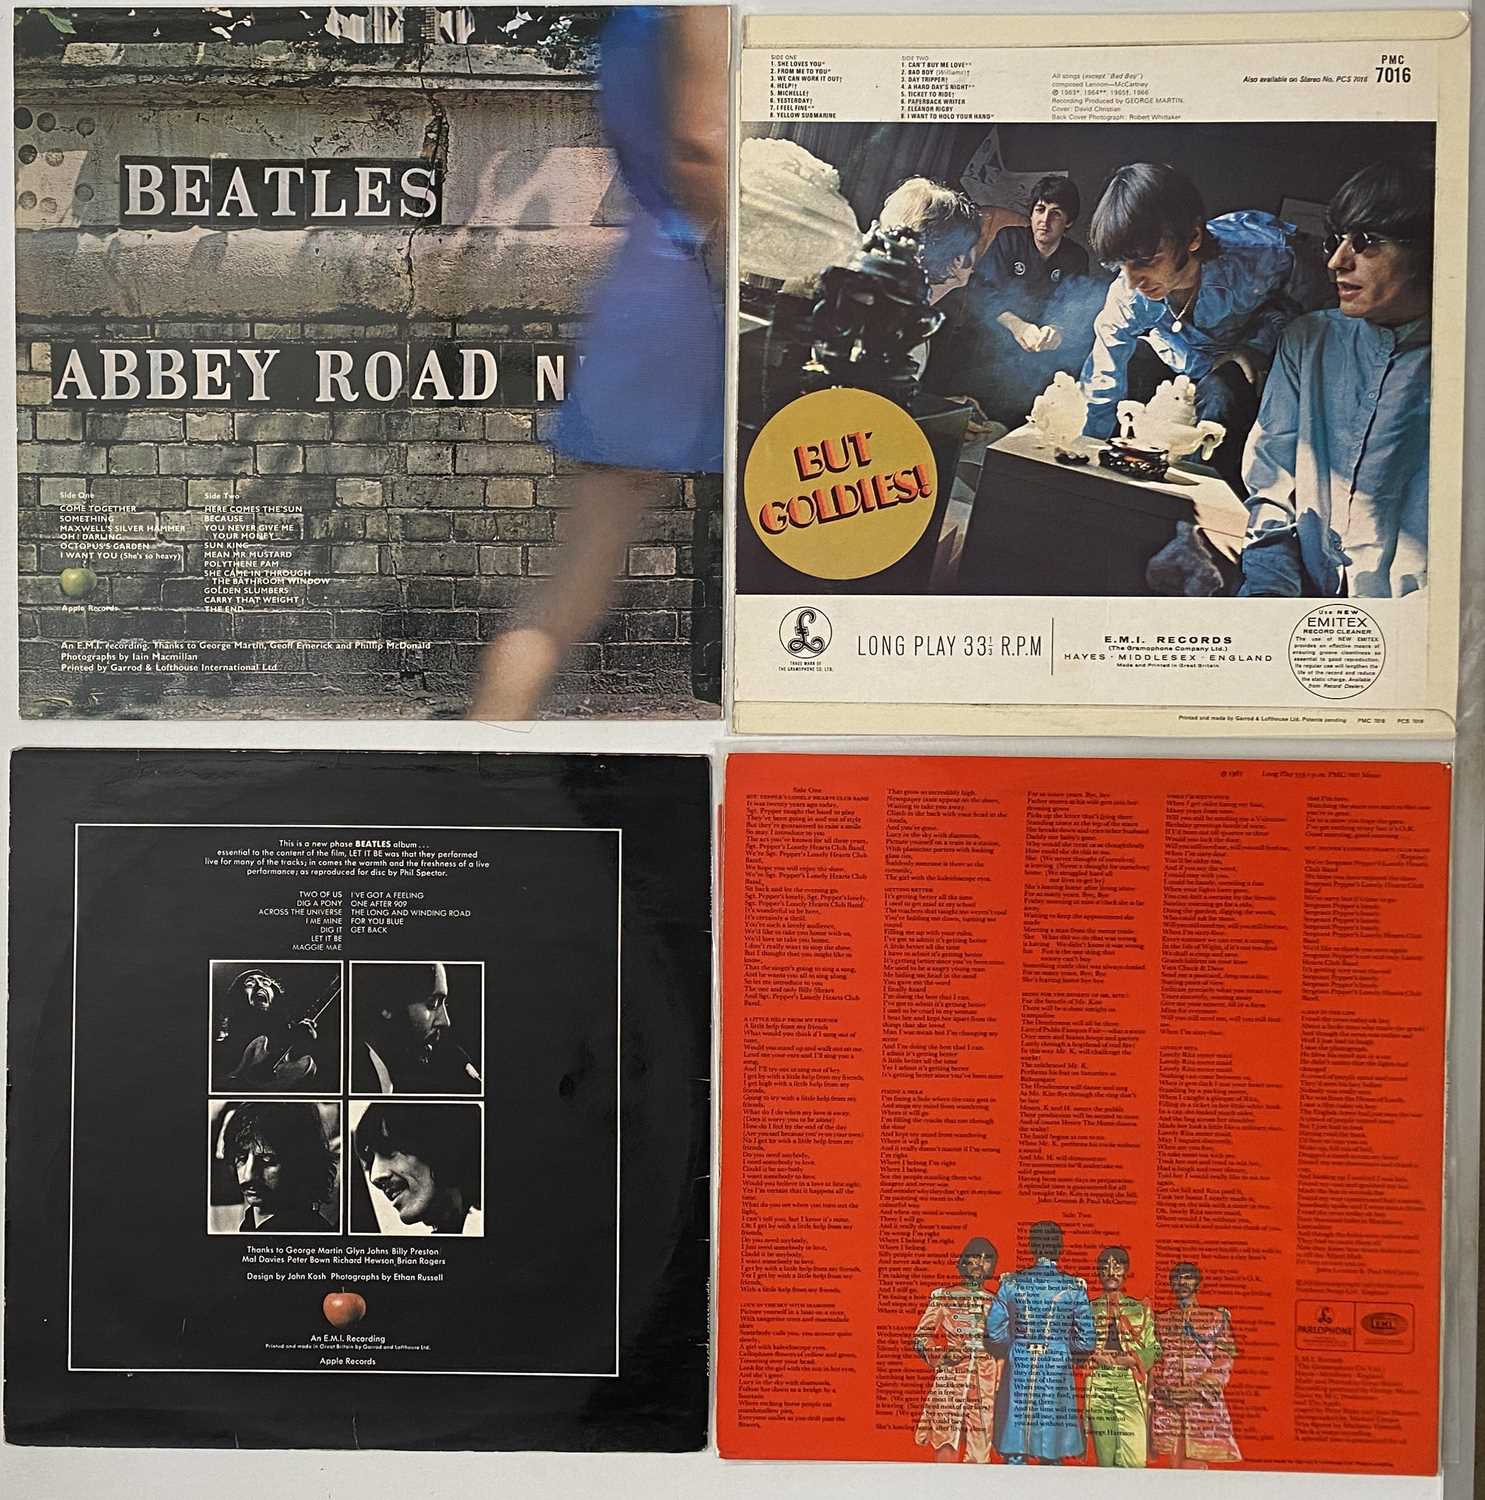 THE BEATLES - LP PACK - Image 2 of 2